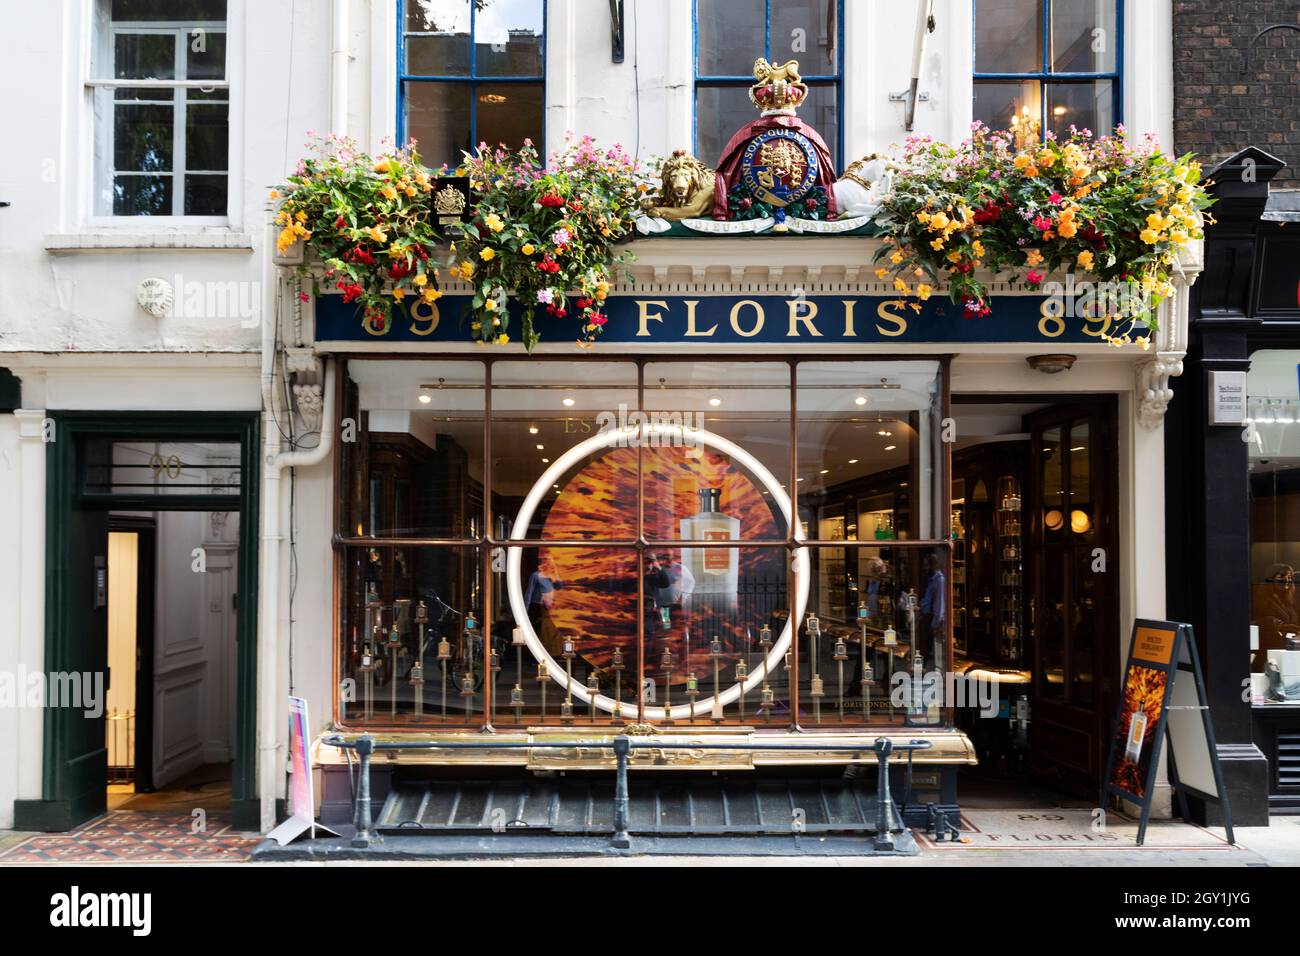 The facade of the Floris perfume shop at 89 Jermyn Street in London, England. Floris was established in 1730 and remains a family-run business. Stock Photo